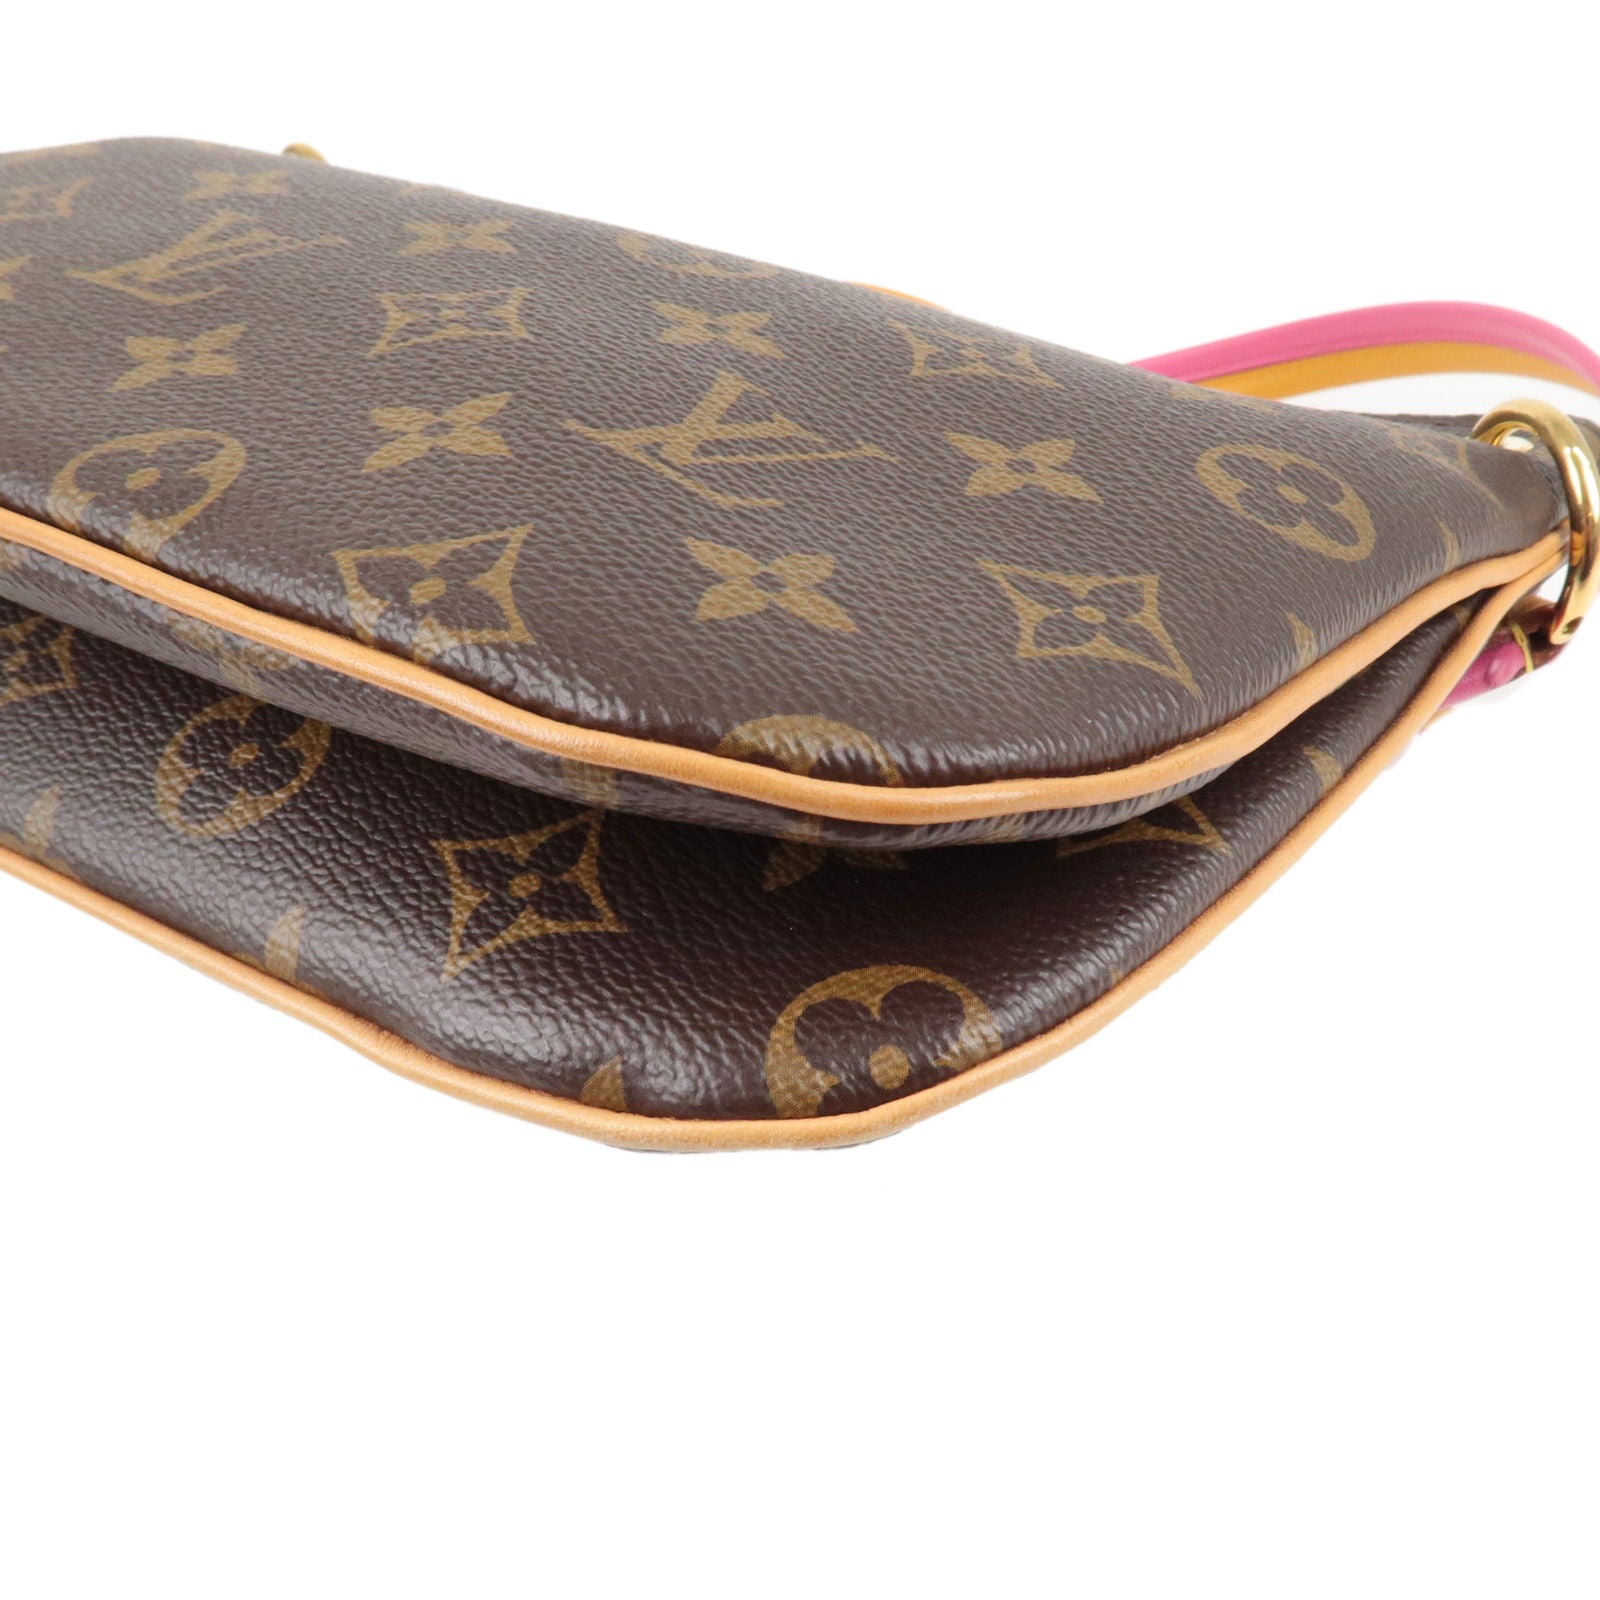 Shop for Louis Vuitton Monogram Canvas Leather Recital Bag - Shipped from  USA